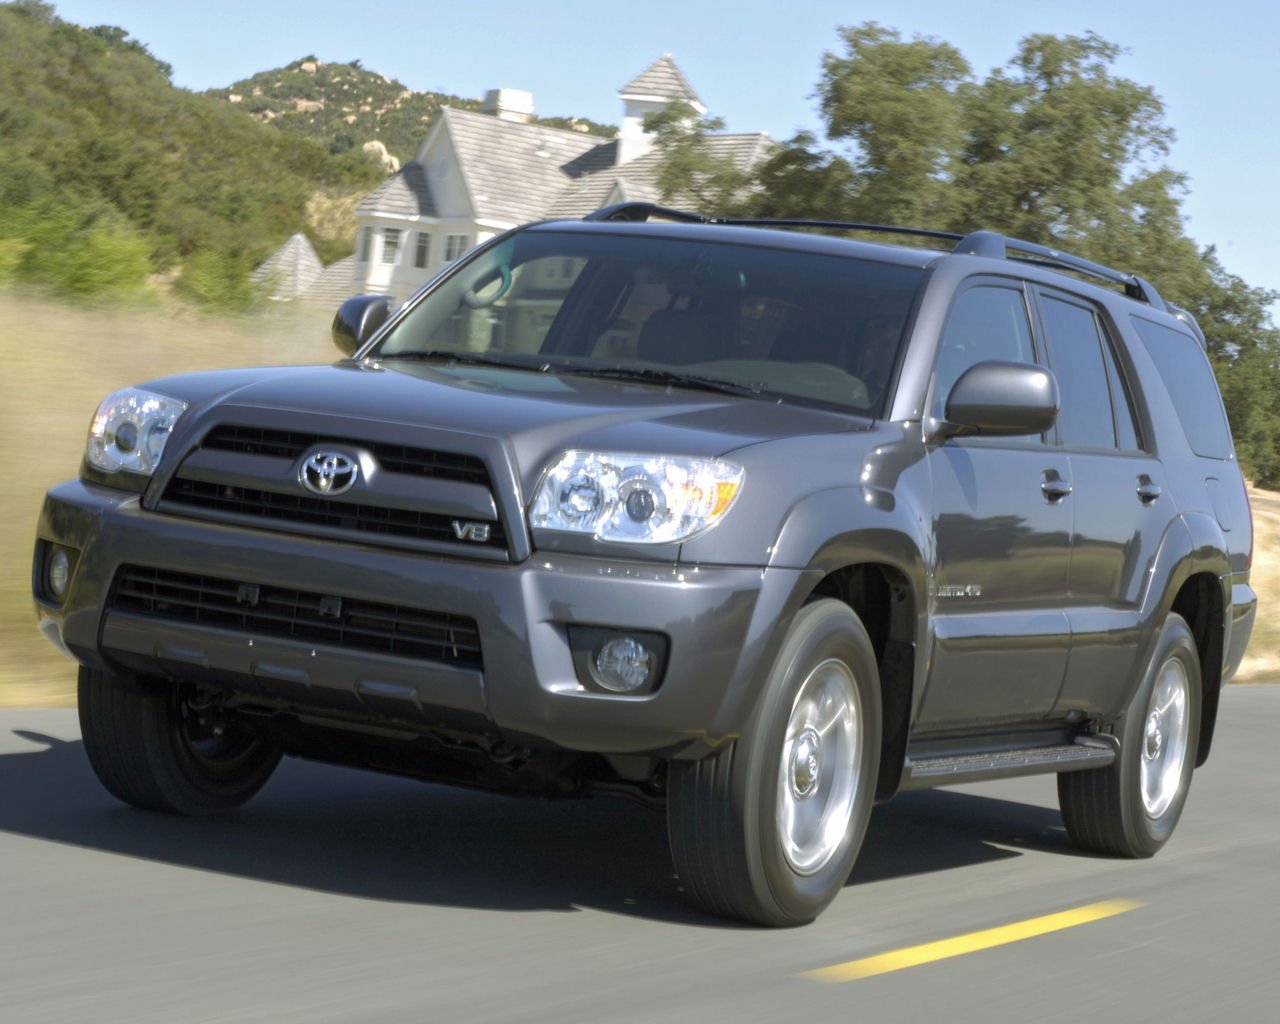 on the Toyota 4Runner wallpaper below and choose Set as Background 1280x1024